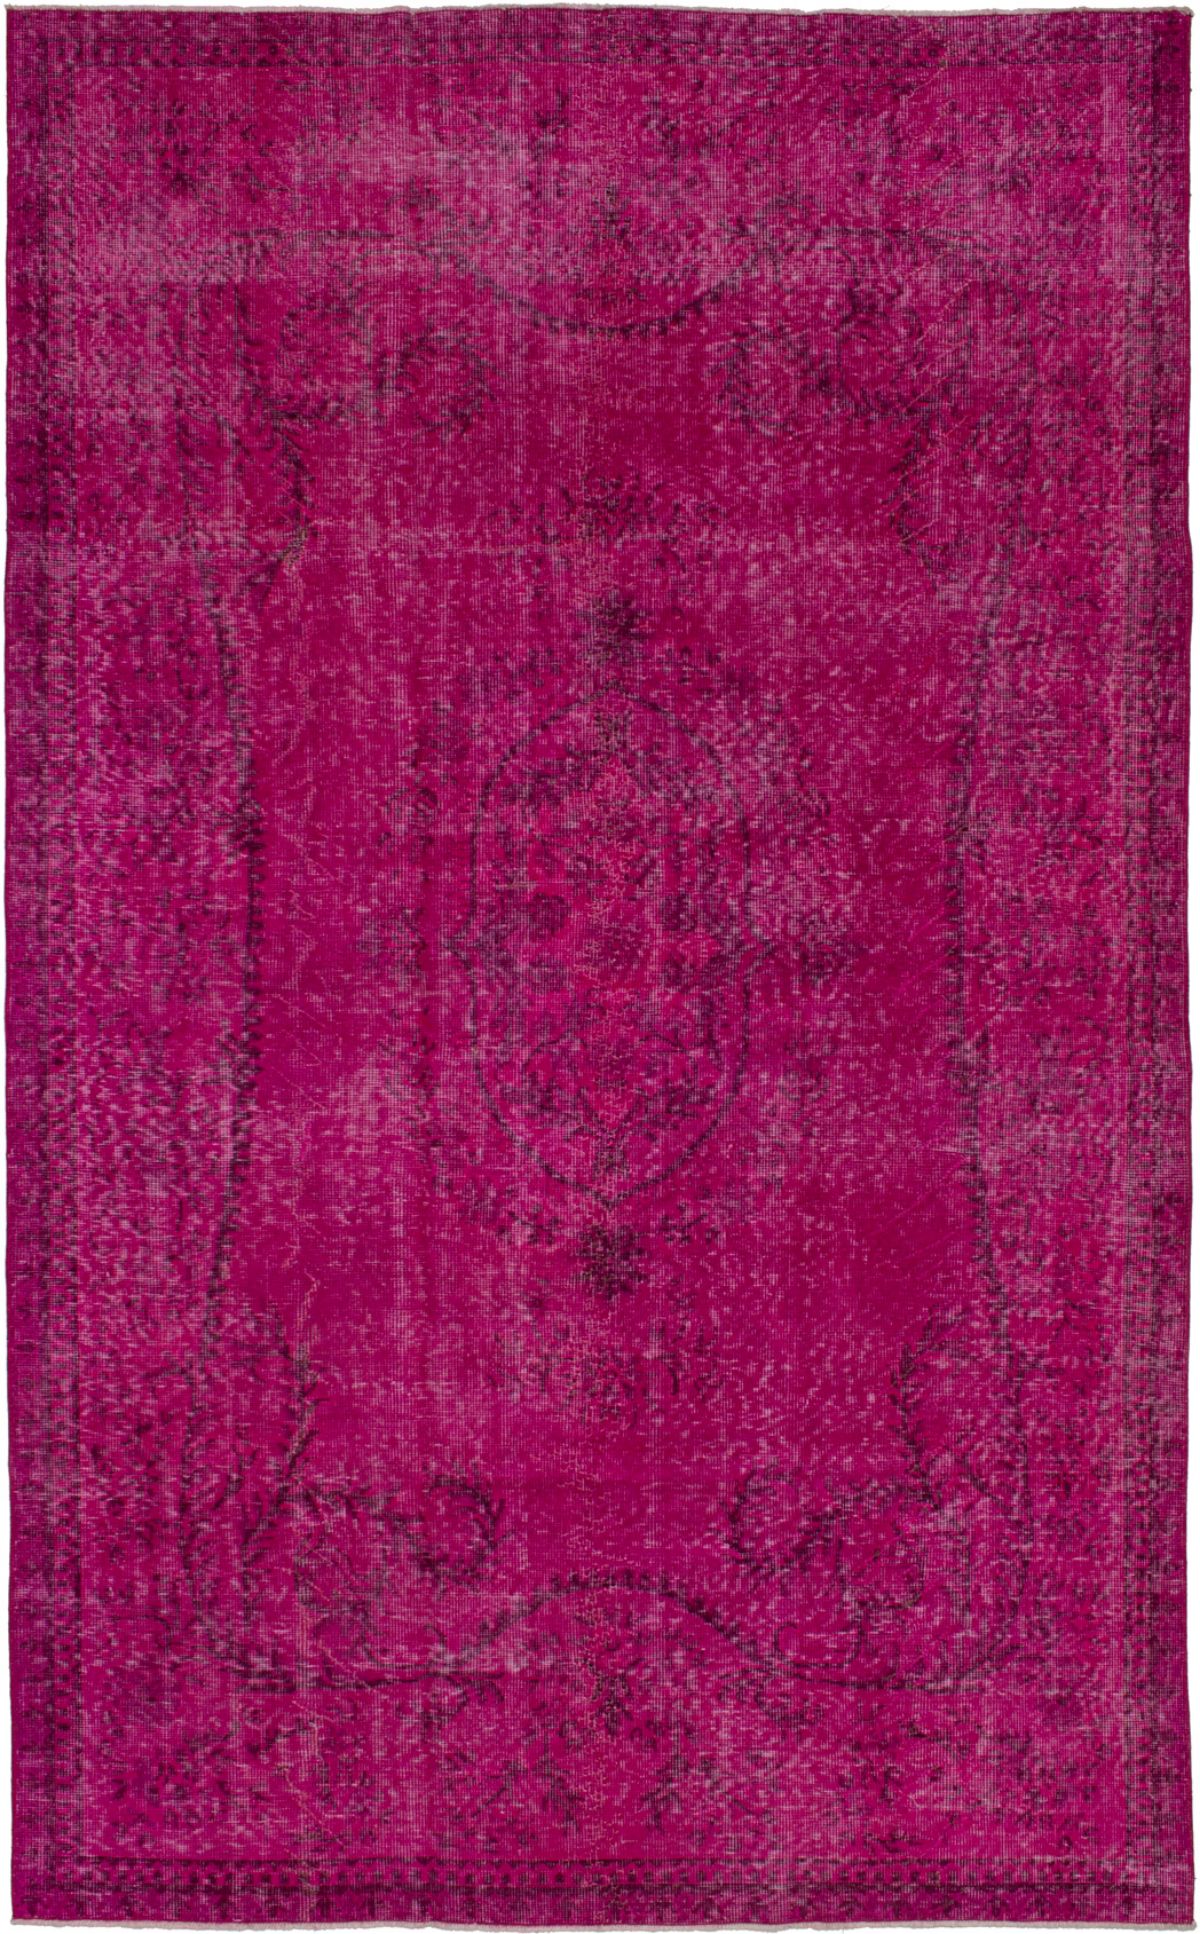 Hand-knotted Color Transition Dark Pink Wool Rug 5'9" x 9'2" Size: 5'9" x 9'2"  